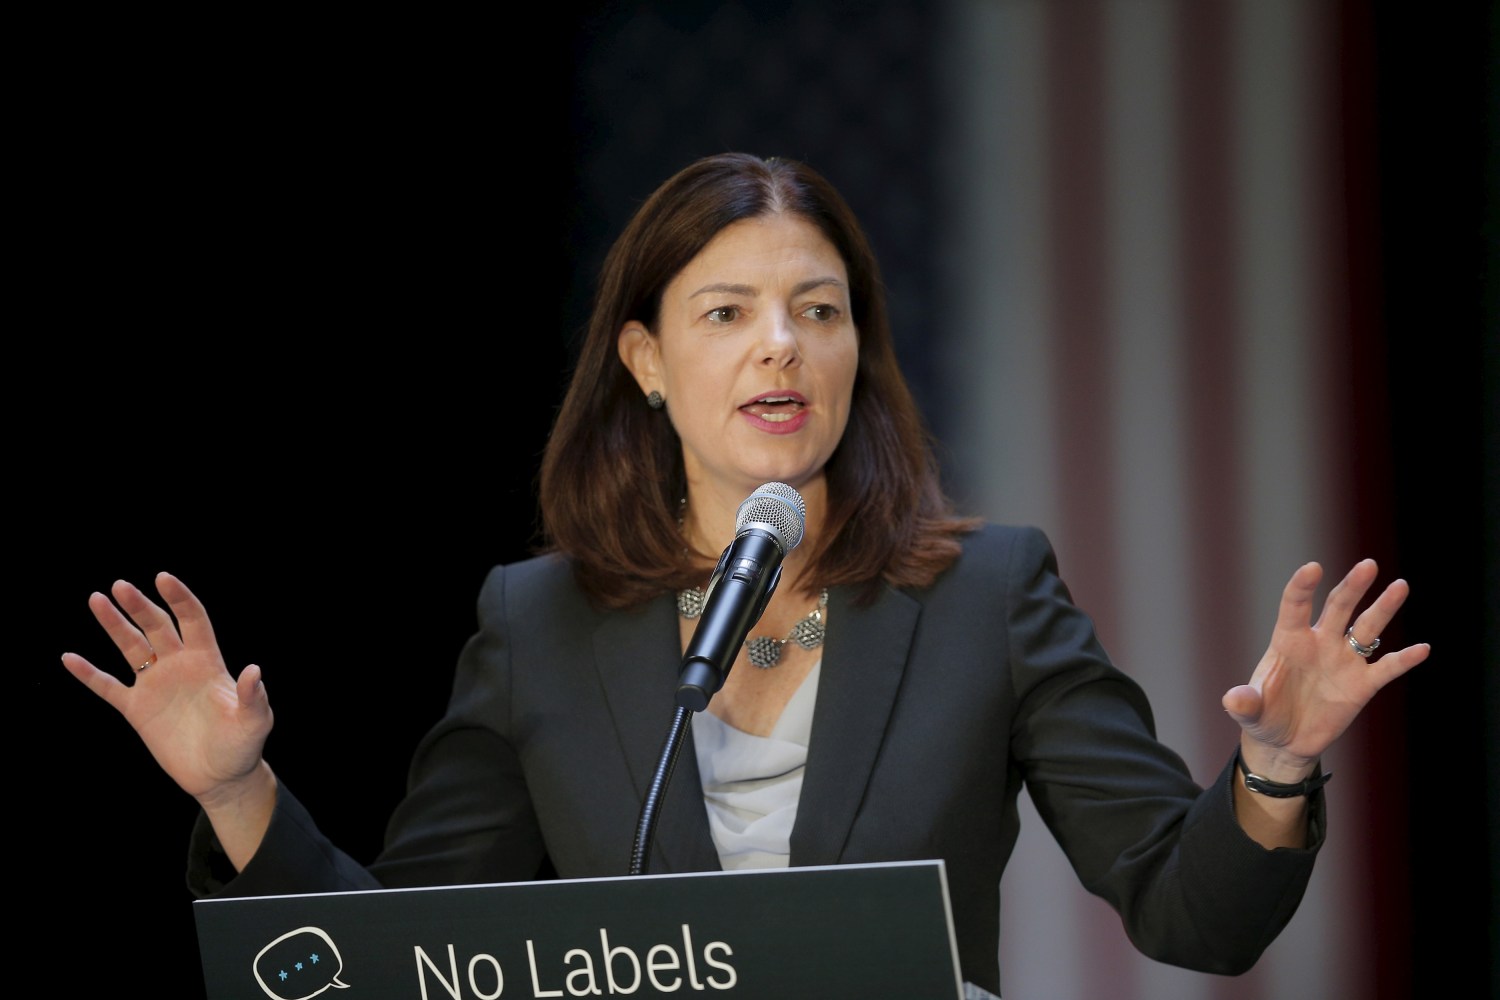 U.S. Senator Kelly Ayotte (R-NH) speaks at the No Labels Problem Solver Convention in Manchester, New Hampshire October 12, 2015. REUTERS/Brian Snyder - RTS43YN